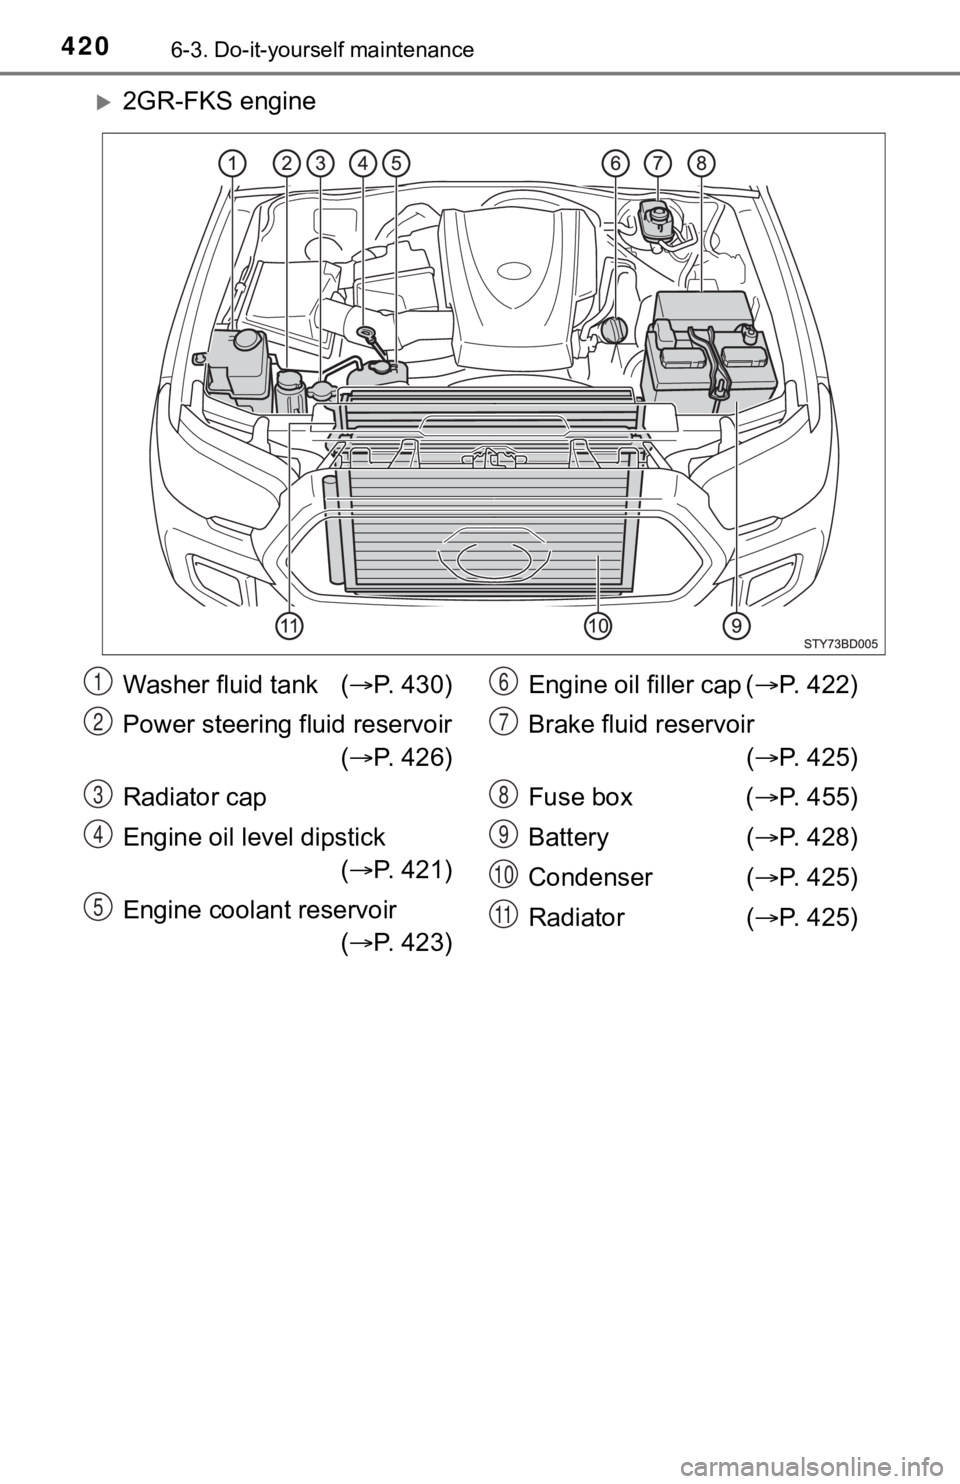 TOYOTA TUNDRA 2023  Owners Manual 4206-3. Do-it-yourself maintenance
2GR-FKS engine
Washer fluid tank (P. 430)
Power steering fluid reservoir ( P. 426)
Radiator cap
Engine oil level dipstick ( P. 421)
Engine coolant reserv